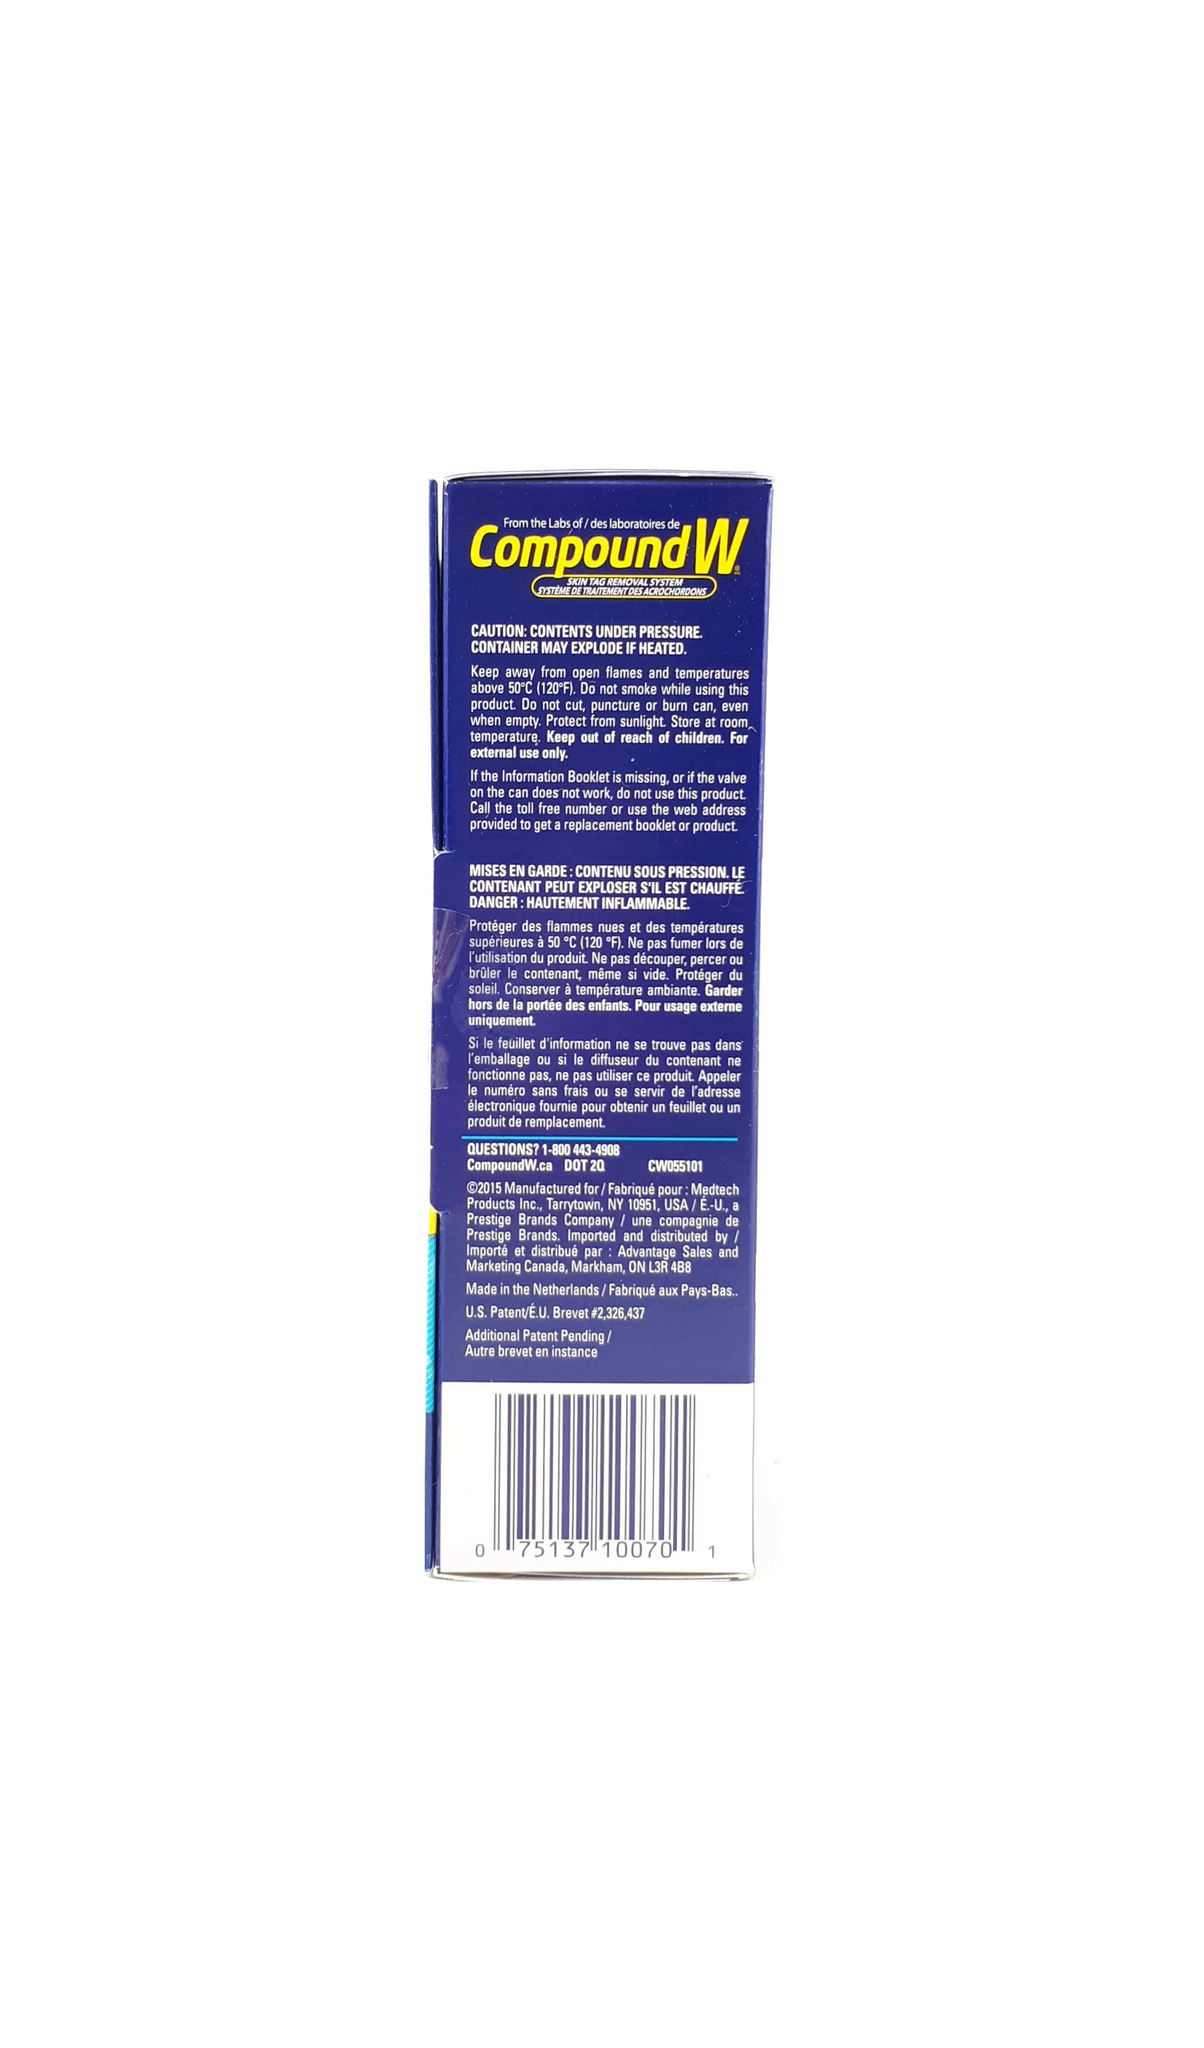 Compound W Skin Tag Remover 8 Applications